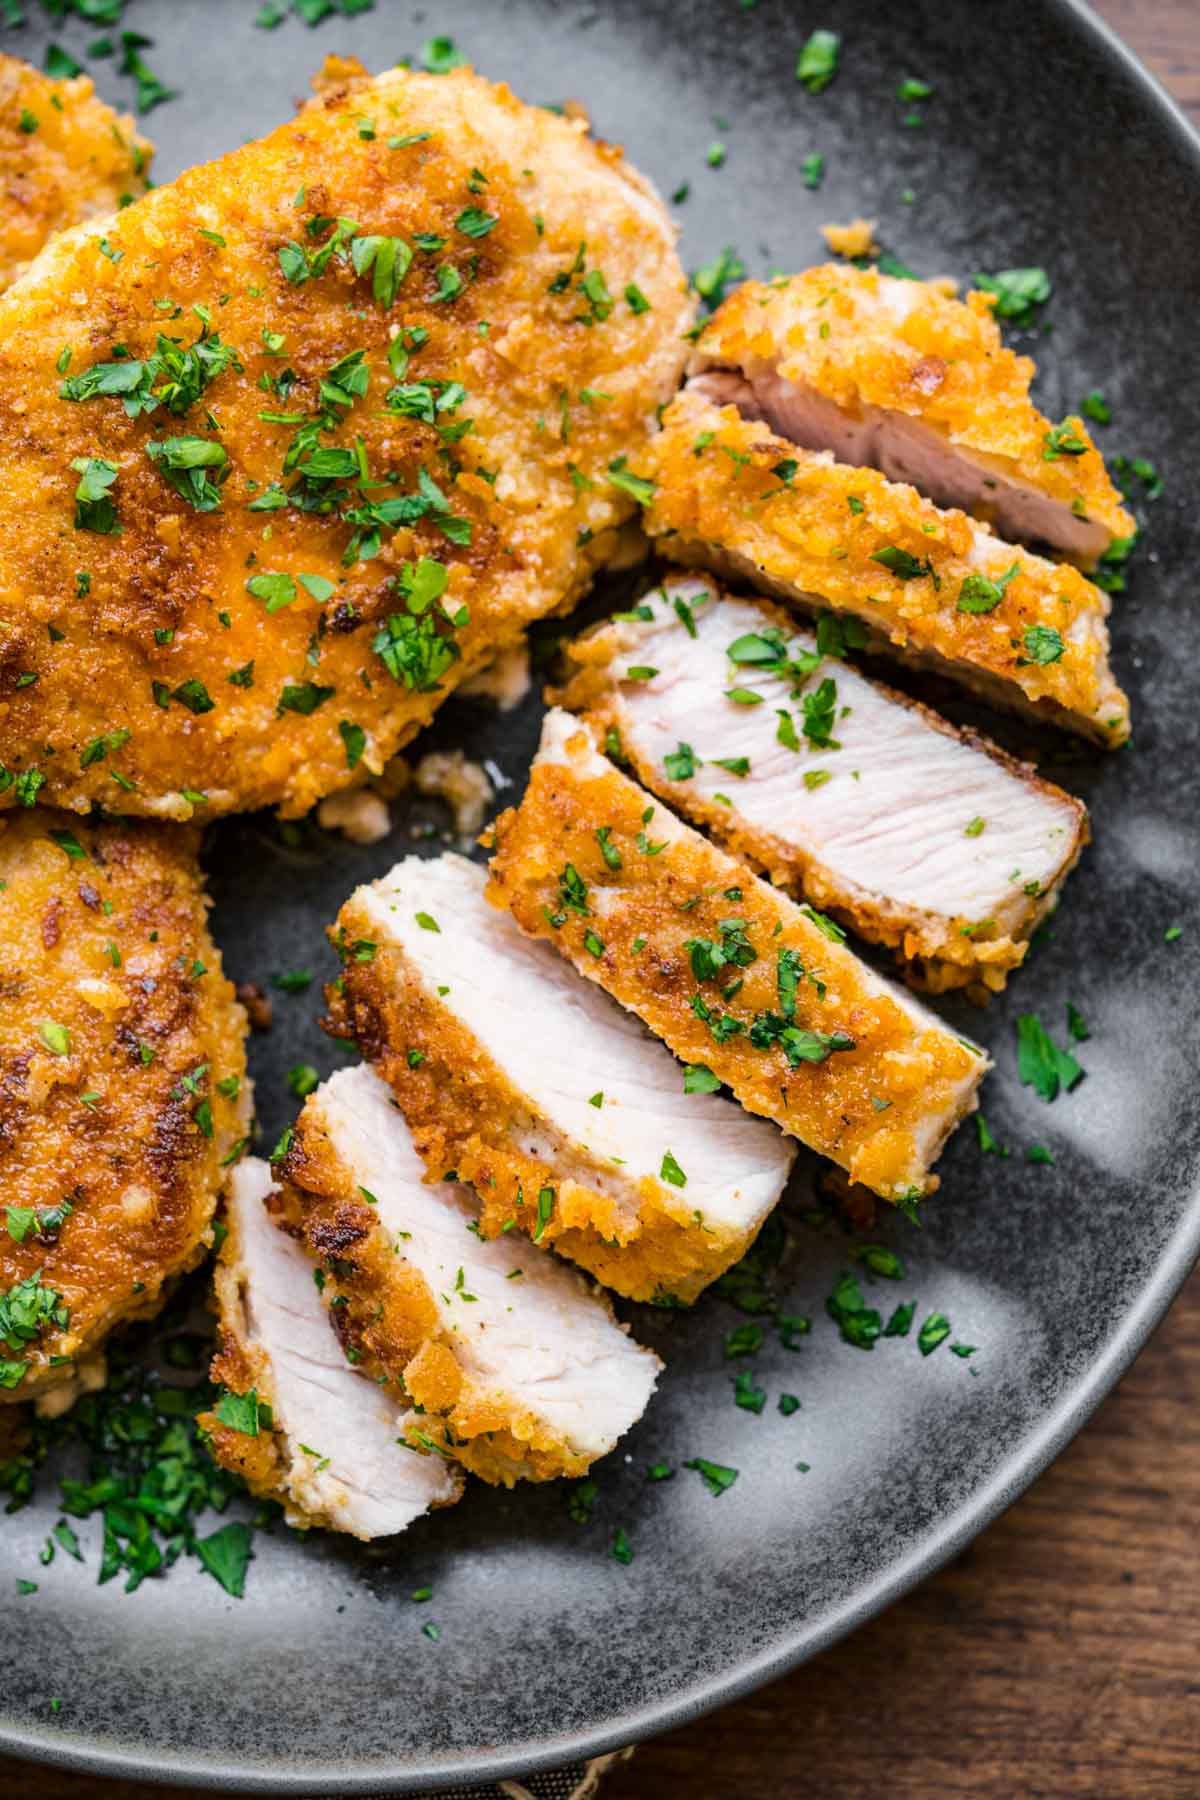 Breaded Pork Chops sliced on serving plate with chopped fresh parsley garnish